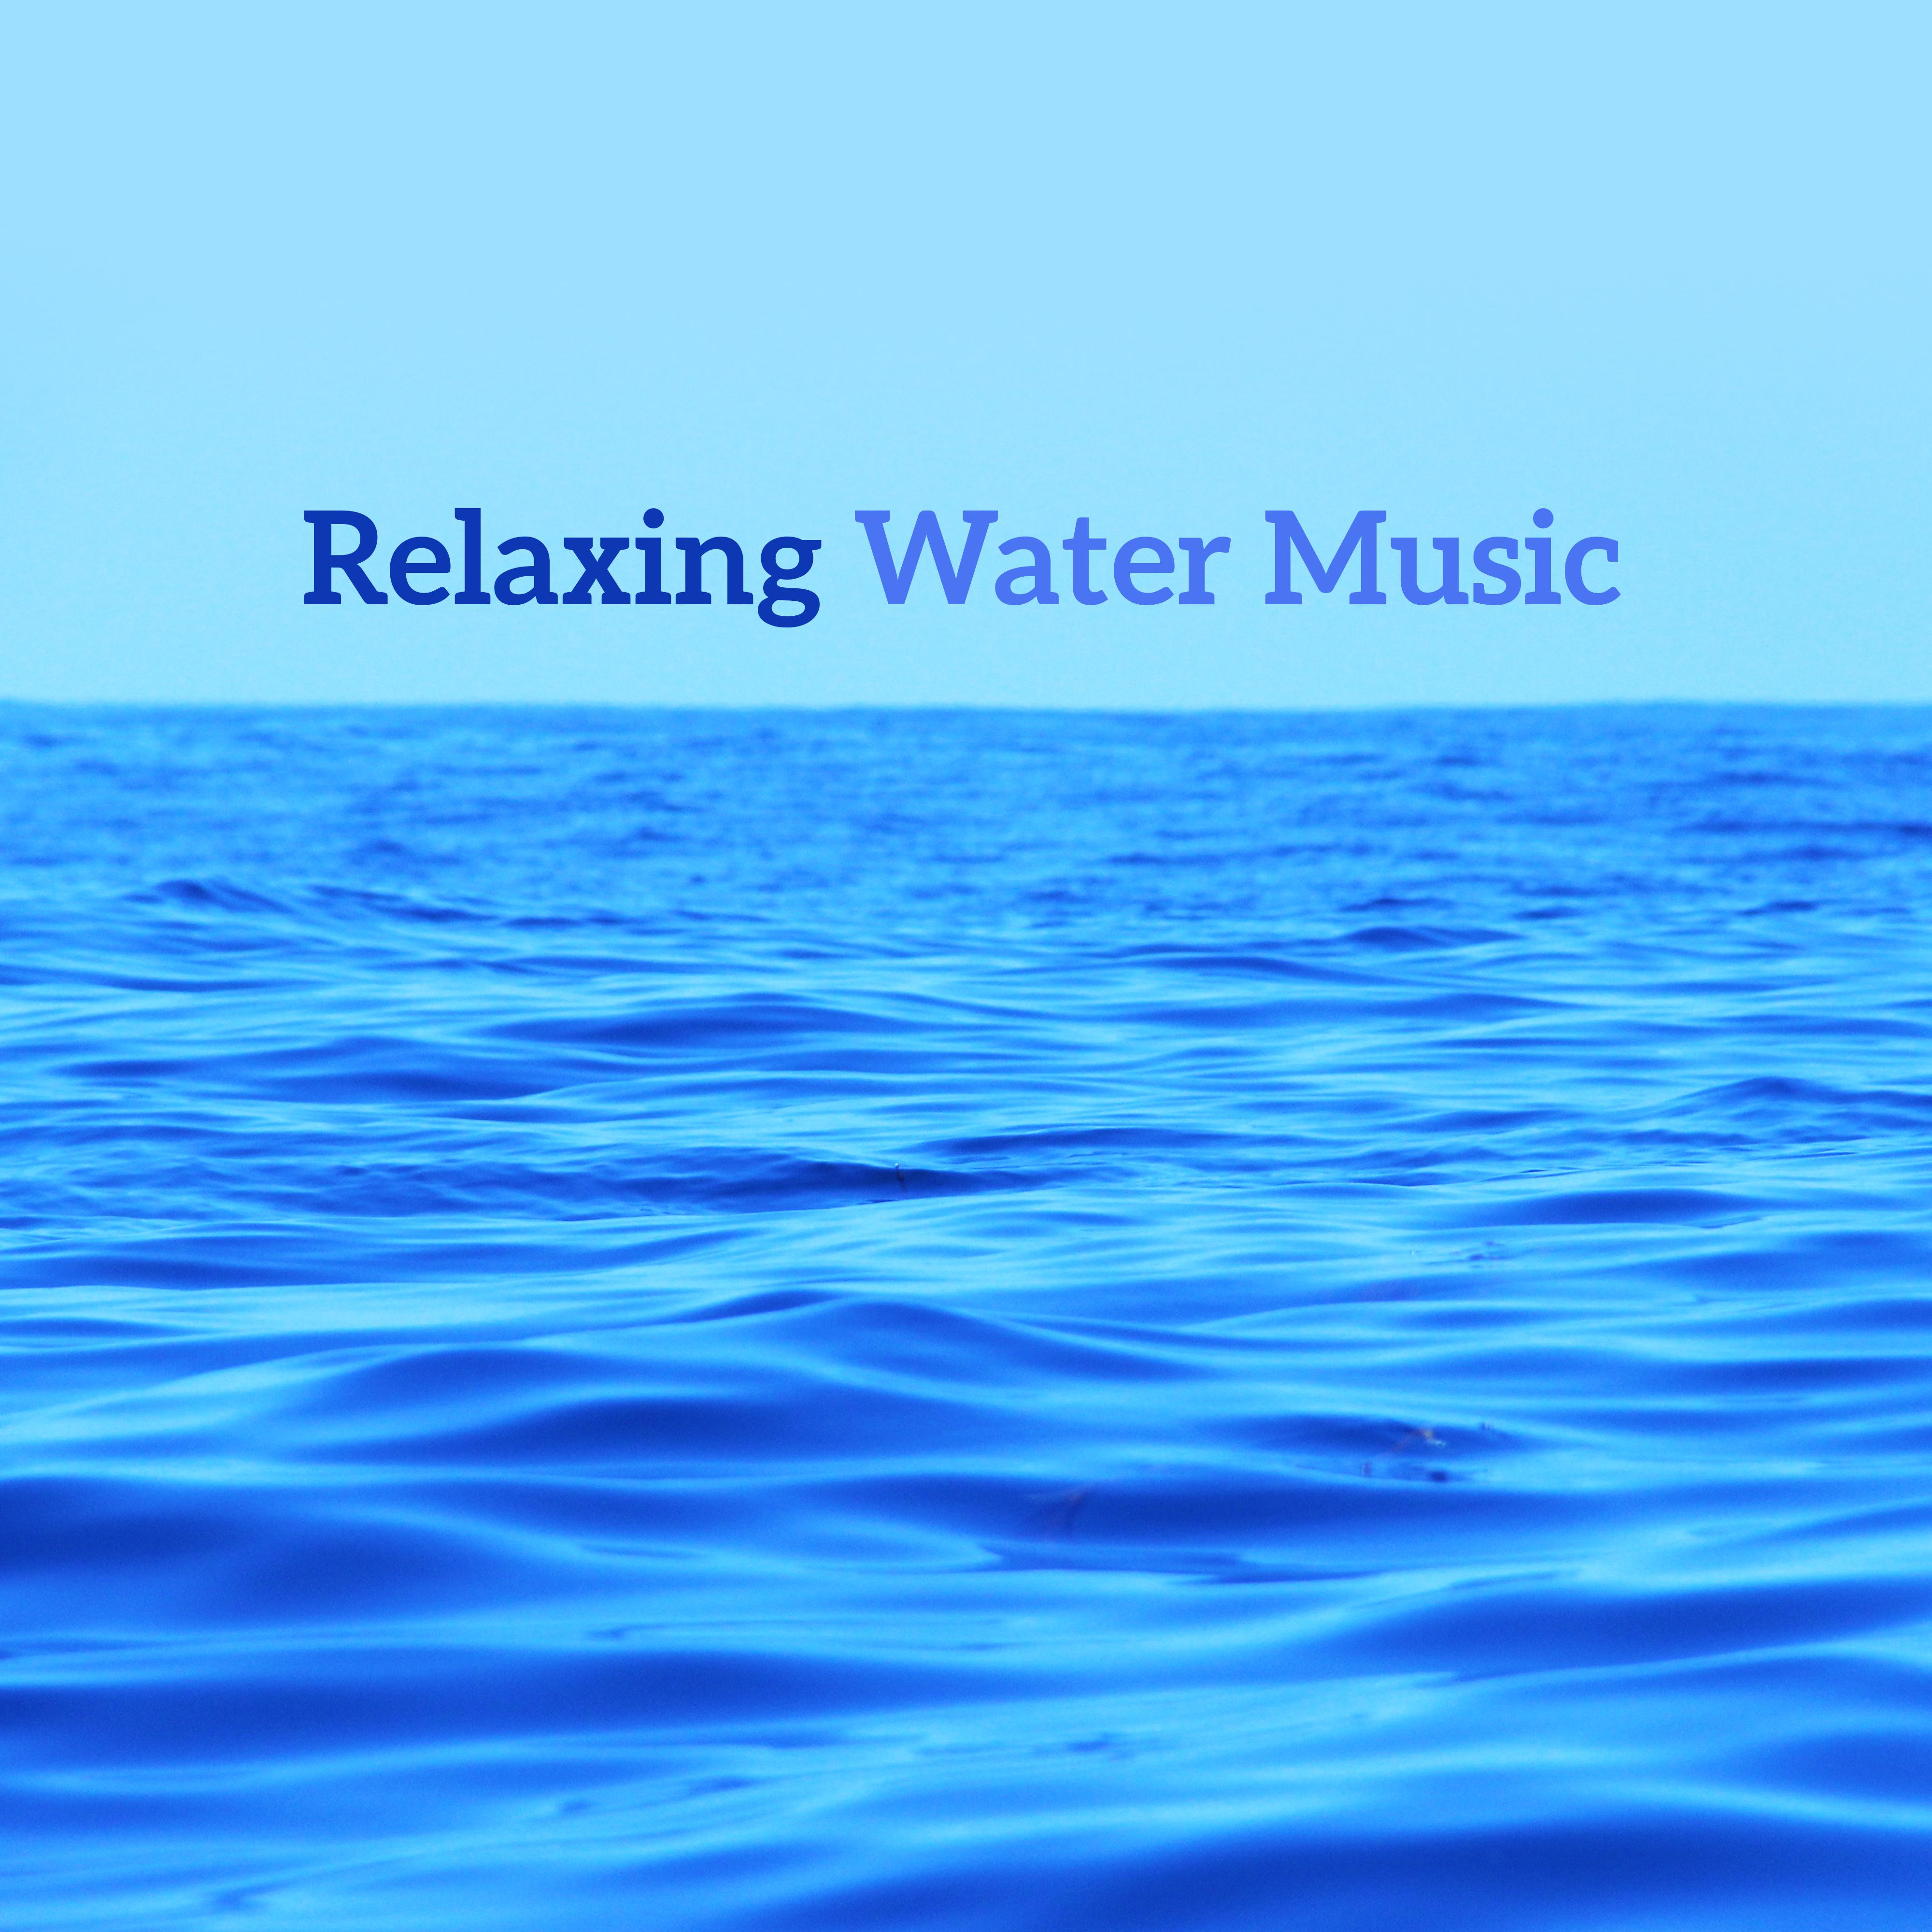 Relaxing Water Music – Easy Listening, Sounds to Relax, Calm Mind, Stress Relief, Healing Nature